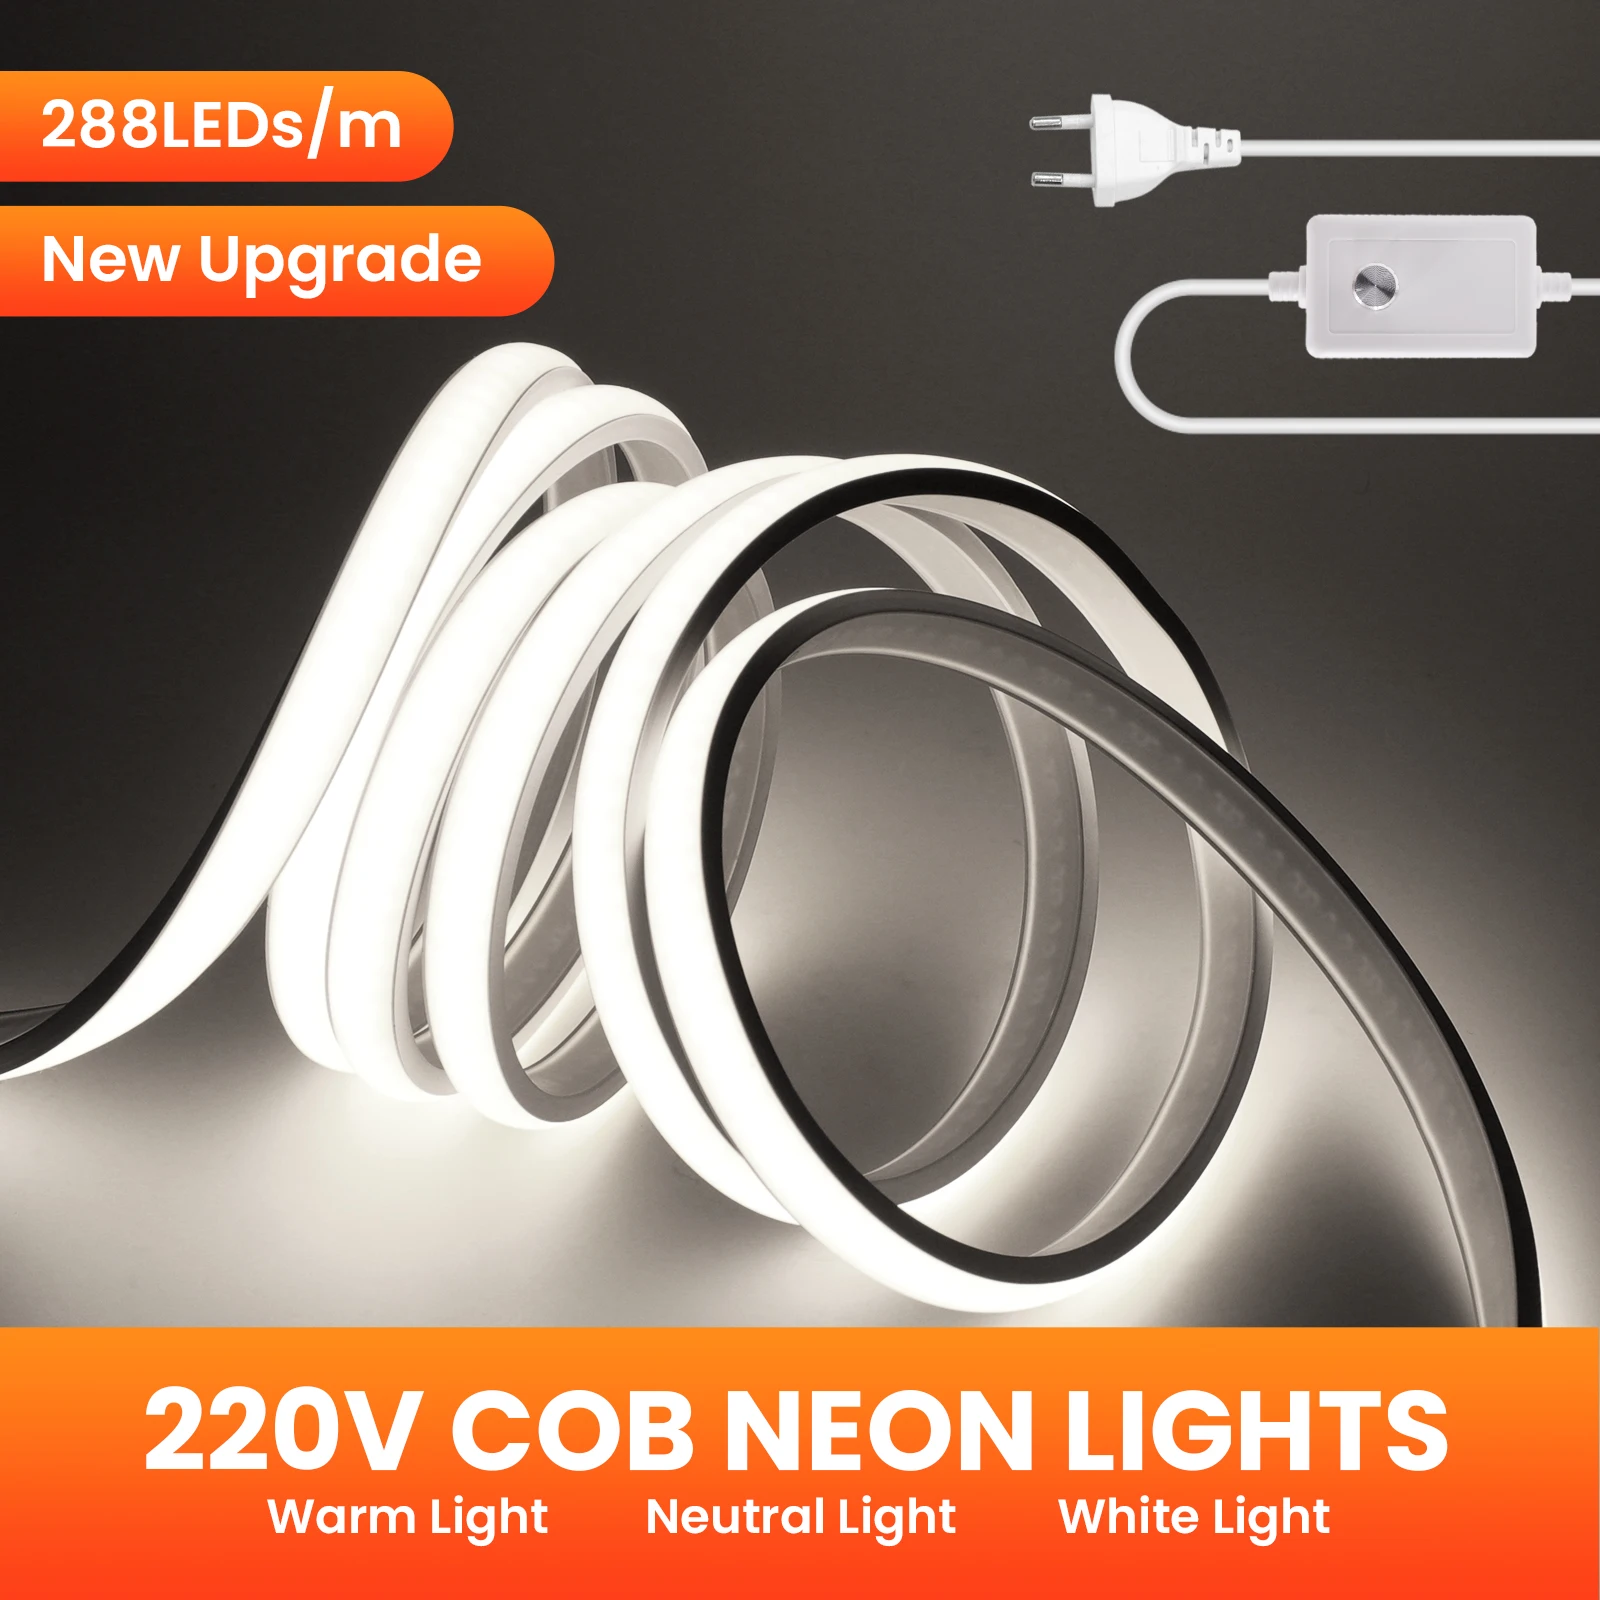 220V COB LED Strip Neon Lights CRI RA90 288LEDs/m Flexible LED Tape Waterproof Outdoor Decor Dimmable Kitchen Home Lighting 1pc stainless steel sewer drain pipe flexible wash basin sink plumbing for home kitchen bathroom downcomer facility accessories